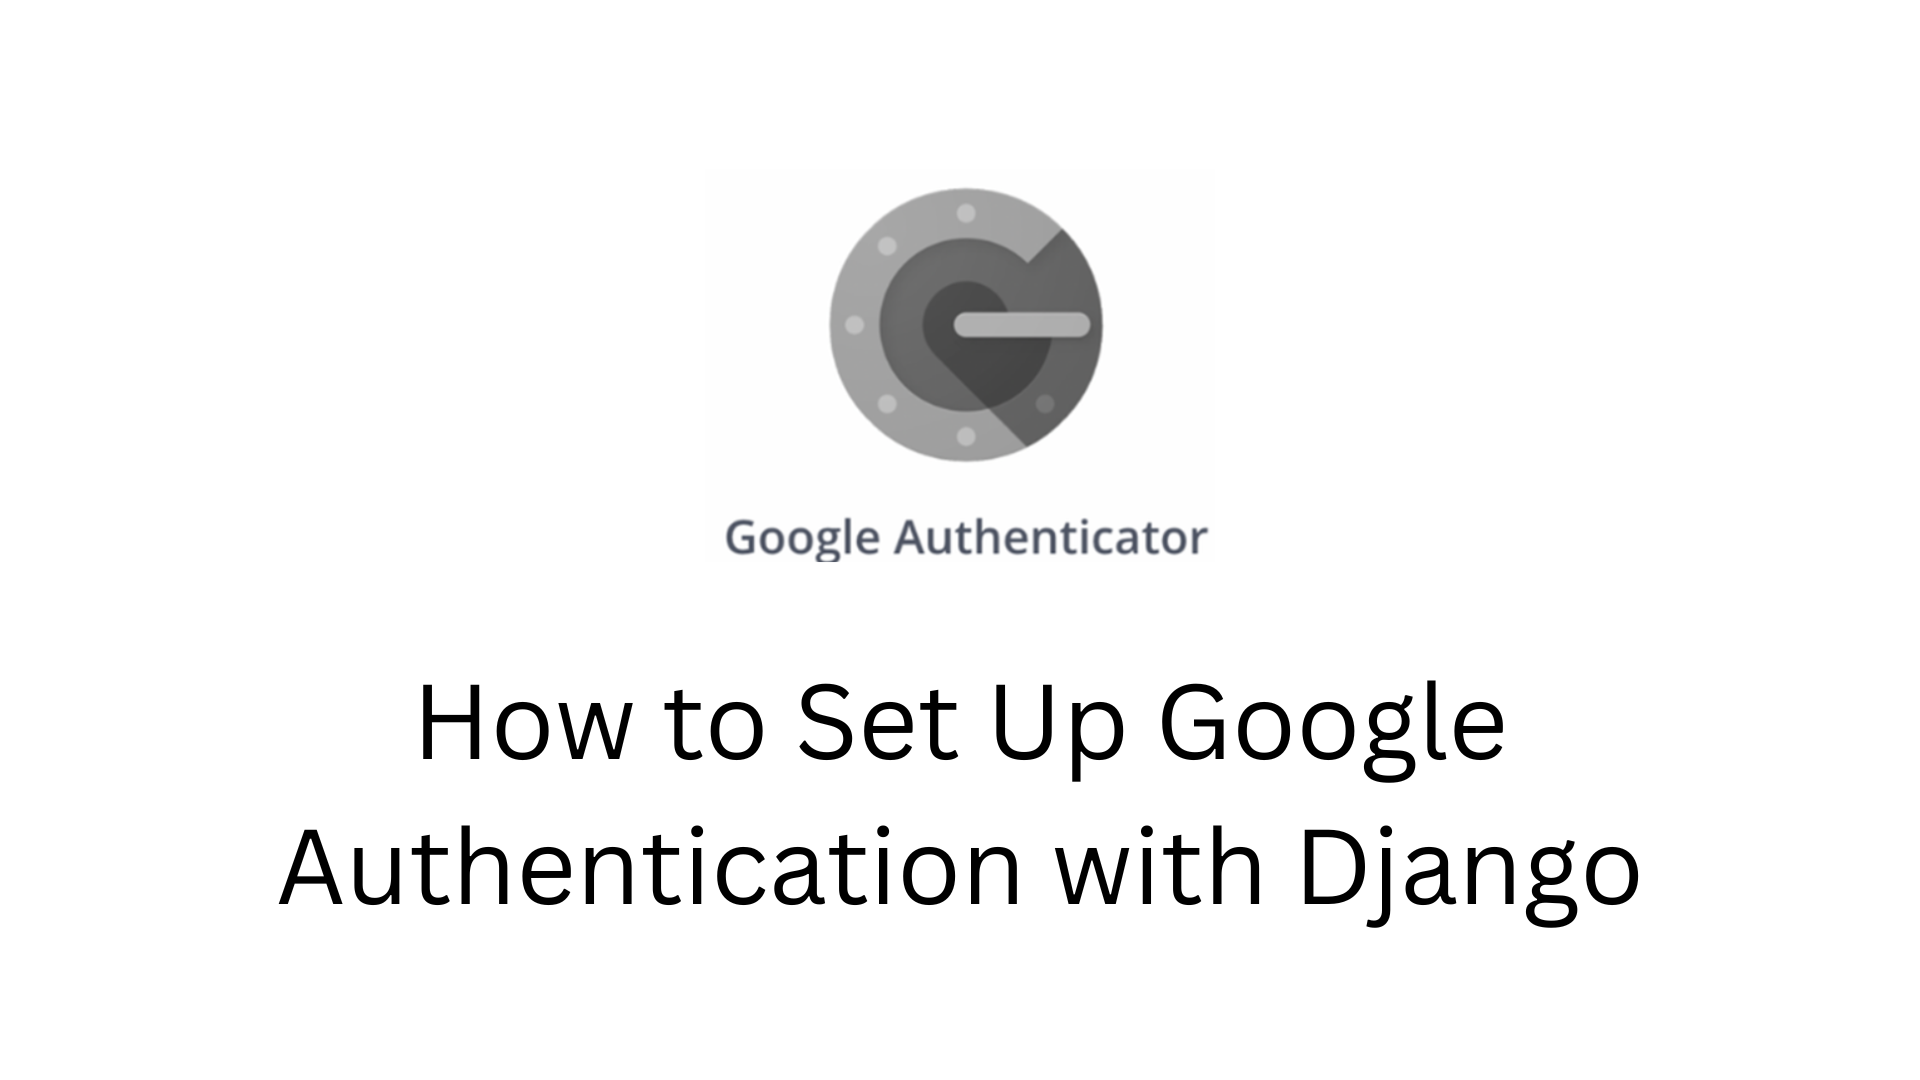 How to Set Up Google Authentication with Django